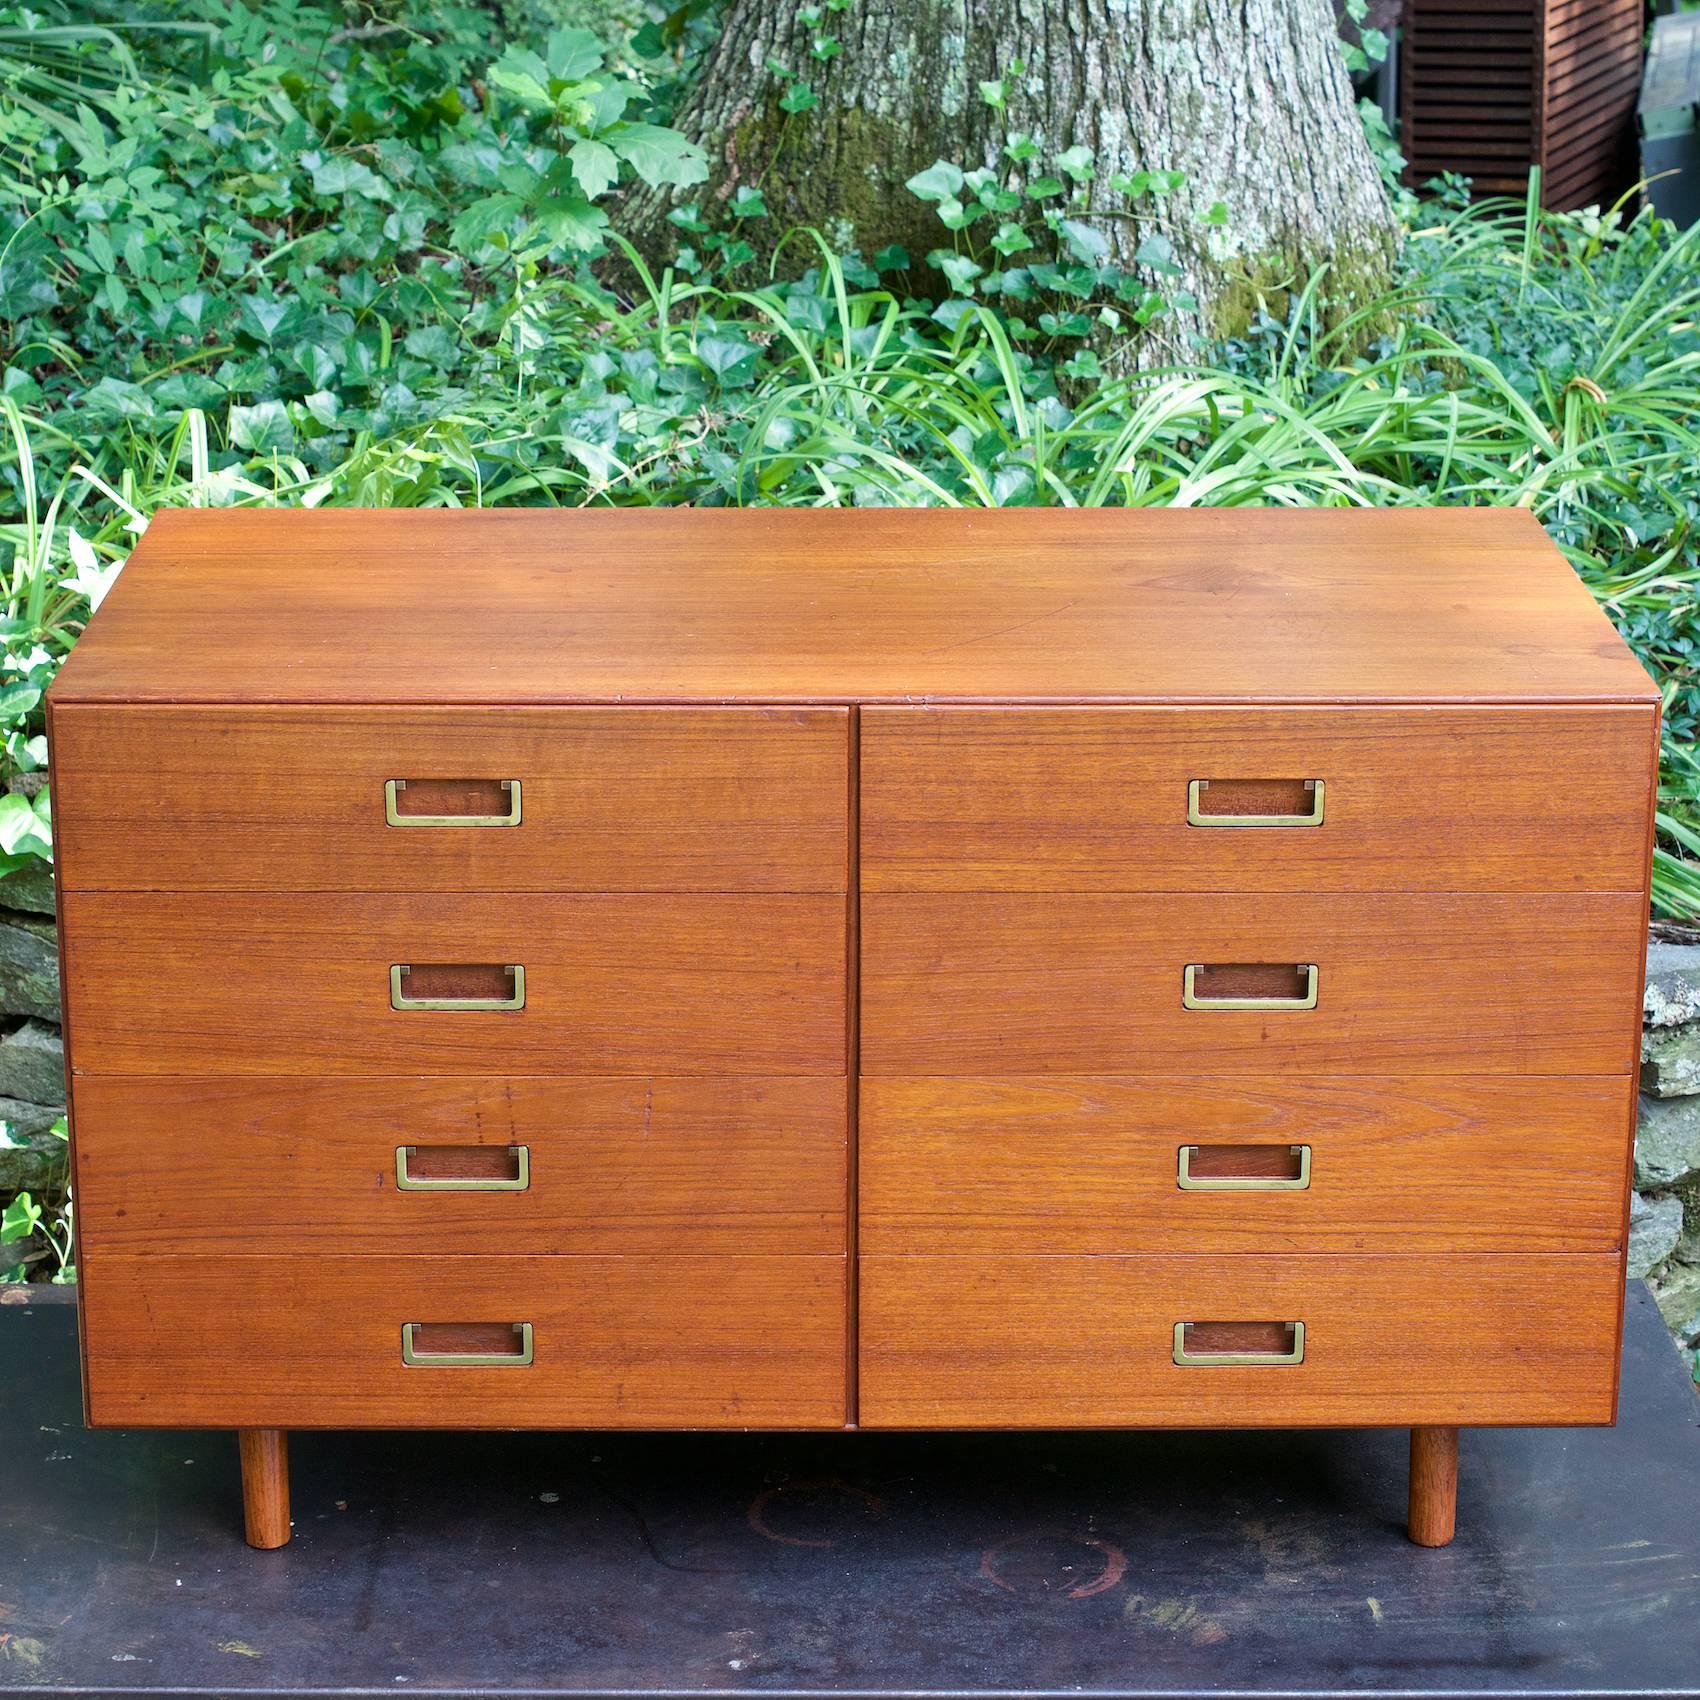 Børge Mogensen teak chest of drawers for Soborg Mobelfabrikk. A beautiful 1950s scandinavian campaign dresser with inset hanging brass handles, mitred edges and drawer edges, solid teak drawer faces, legs, a heavy unit! Very usable at almost two